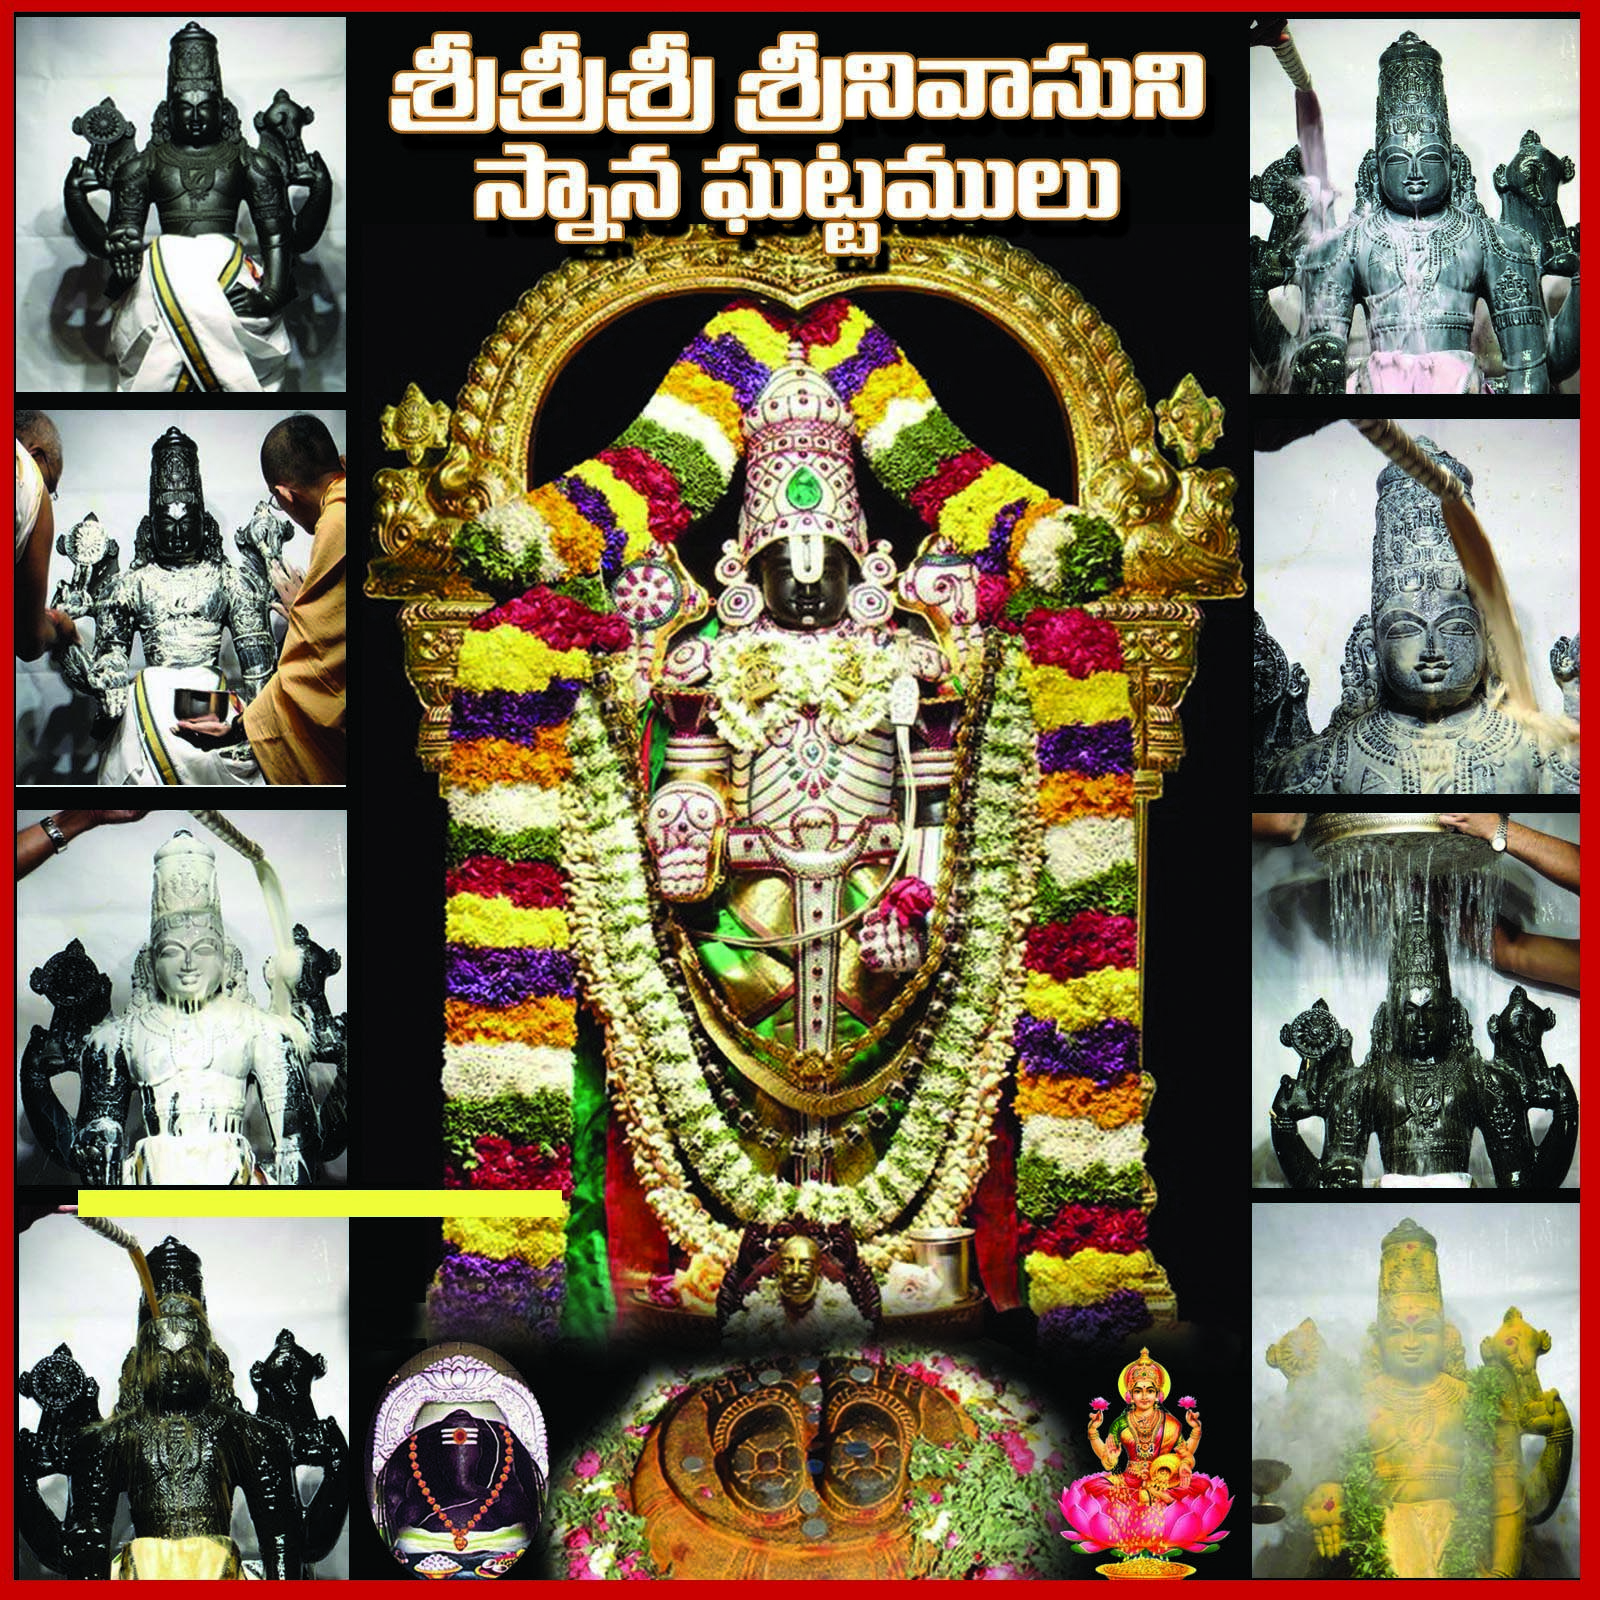 Lord Balaji abhishekam Hd Wallpapers pictures gallery images ...